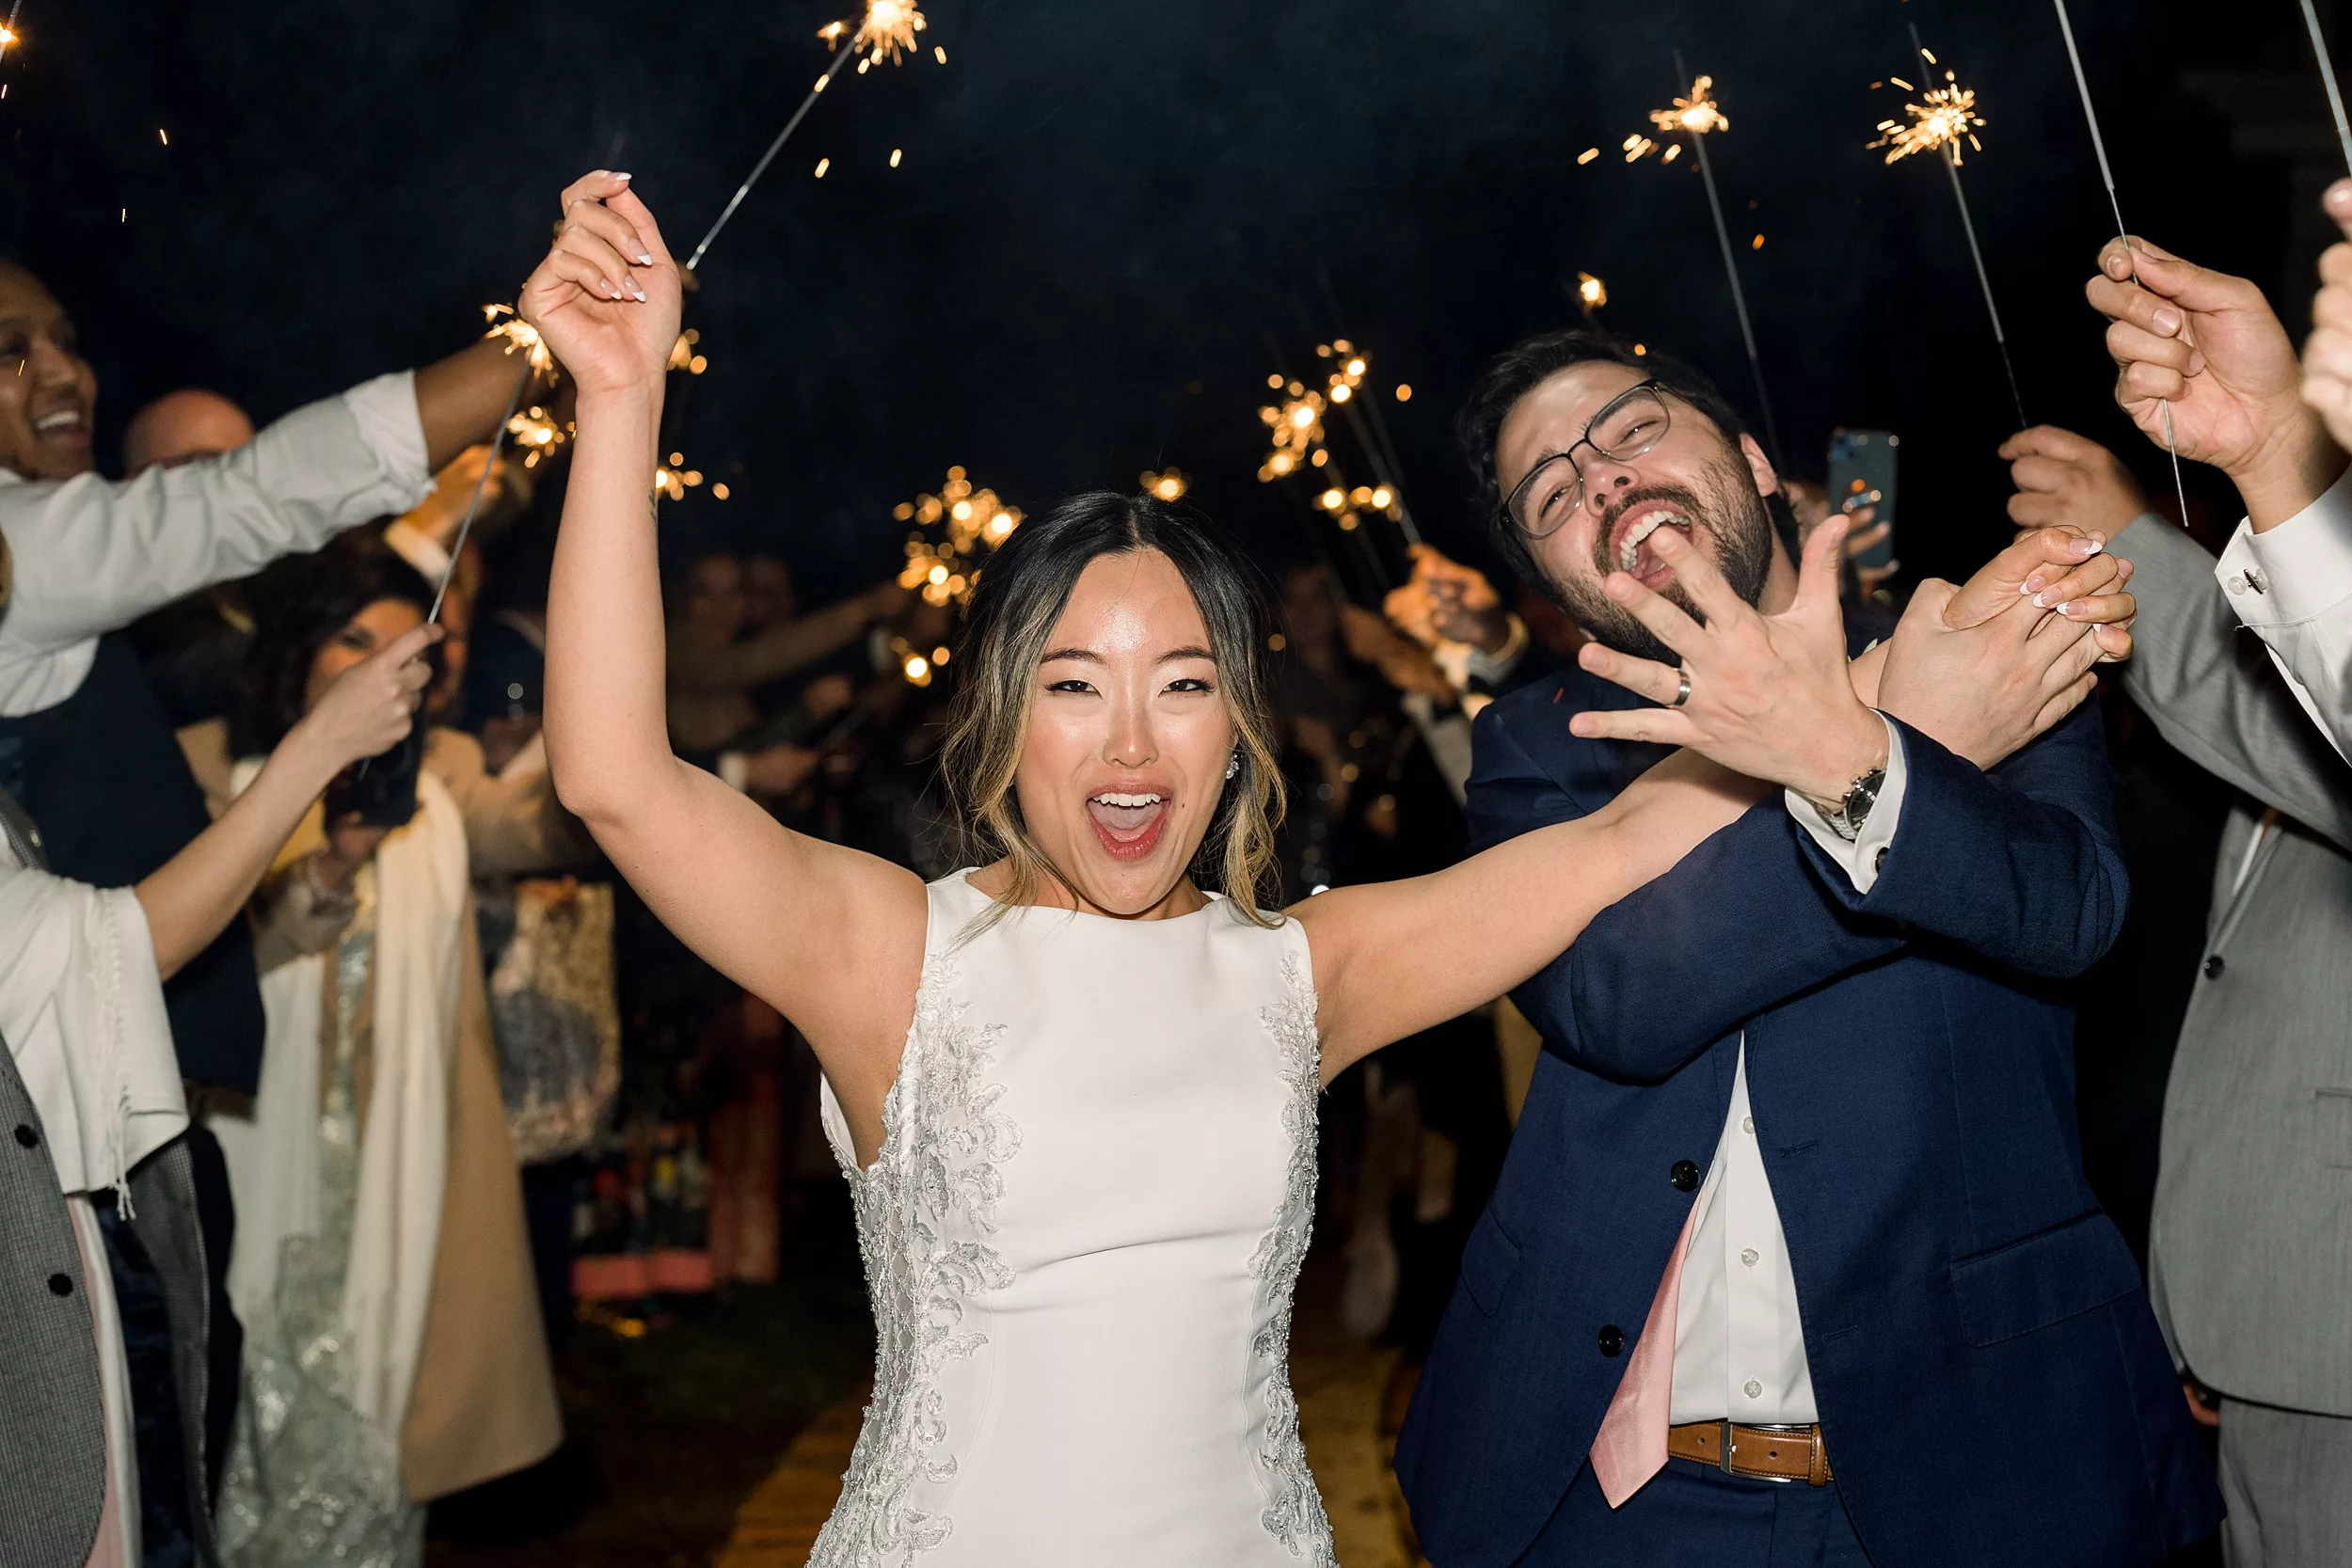 Newlyweds celebrate surrounded by sparklers while exiting their wedding